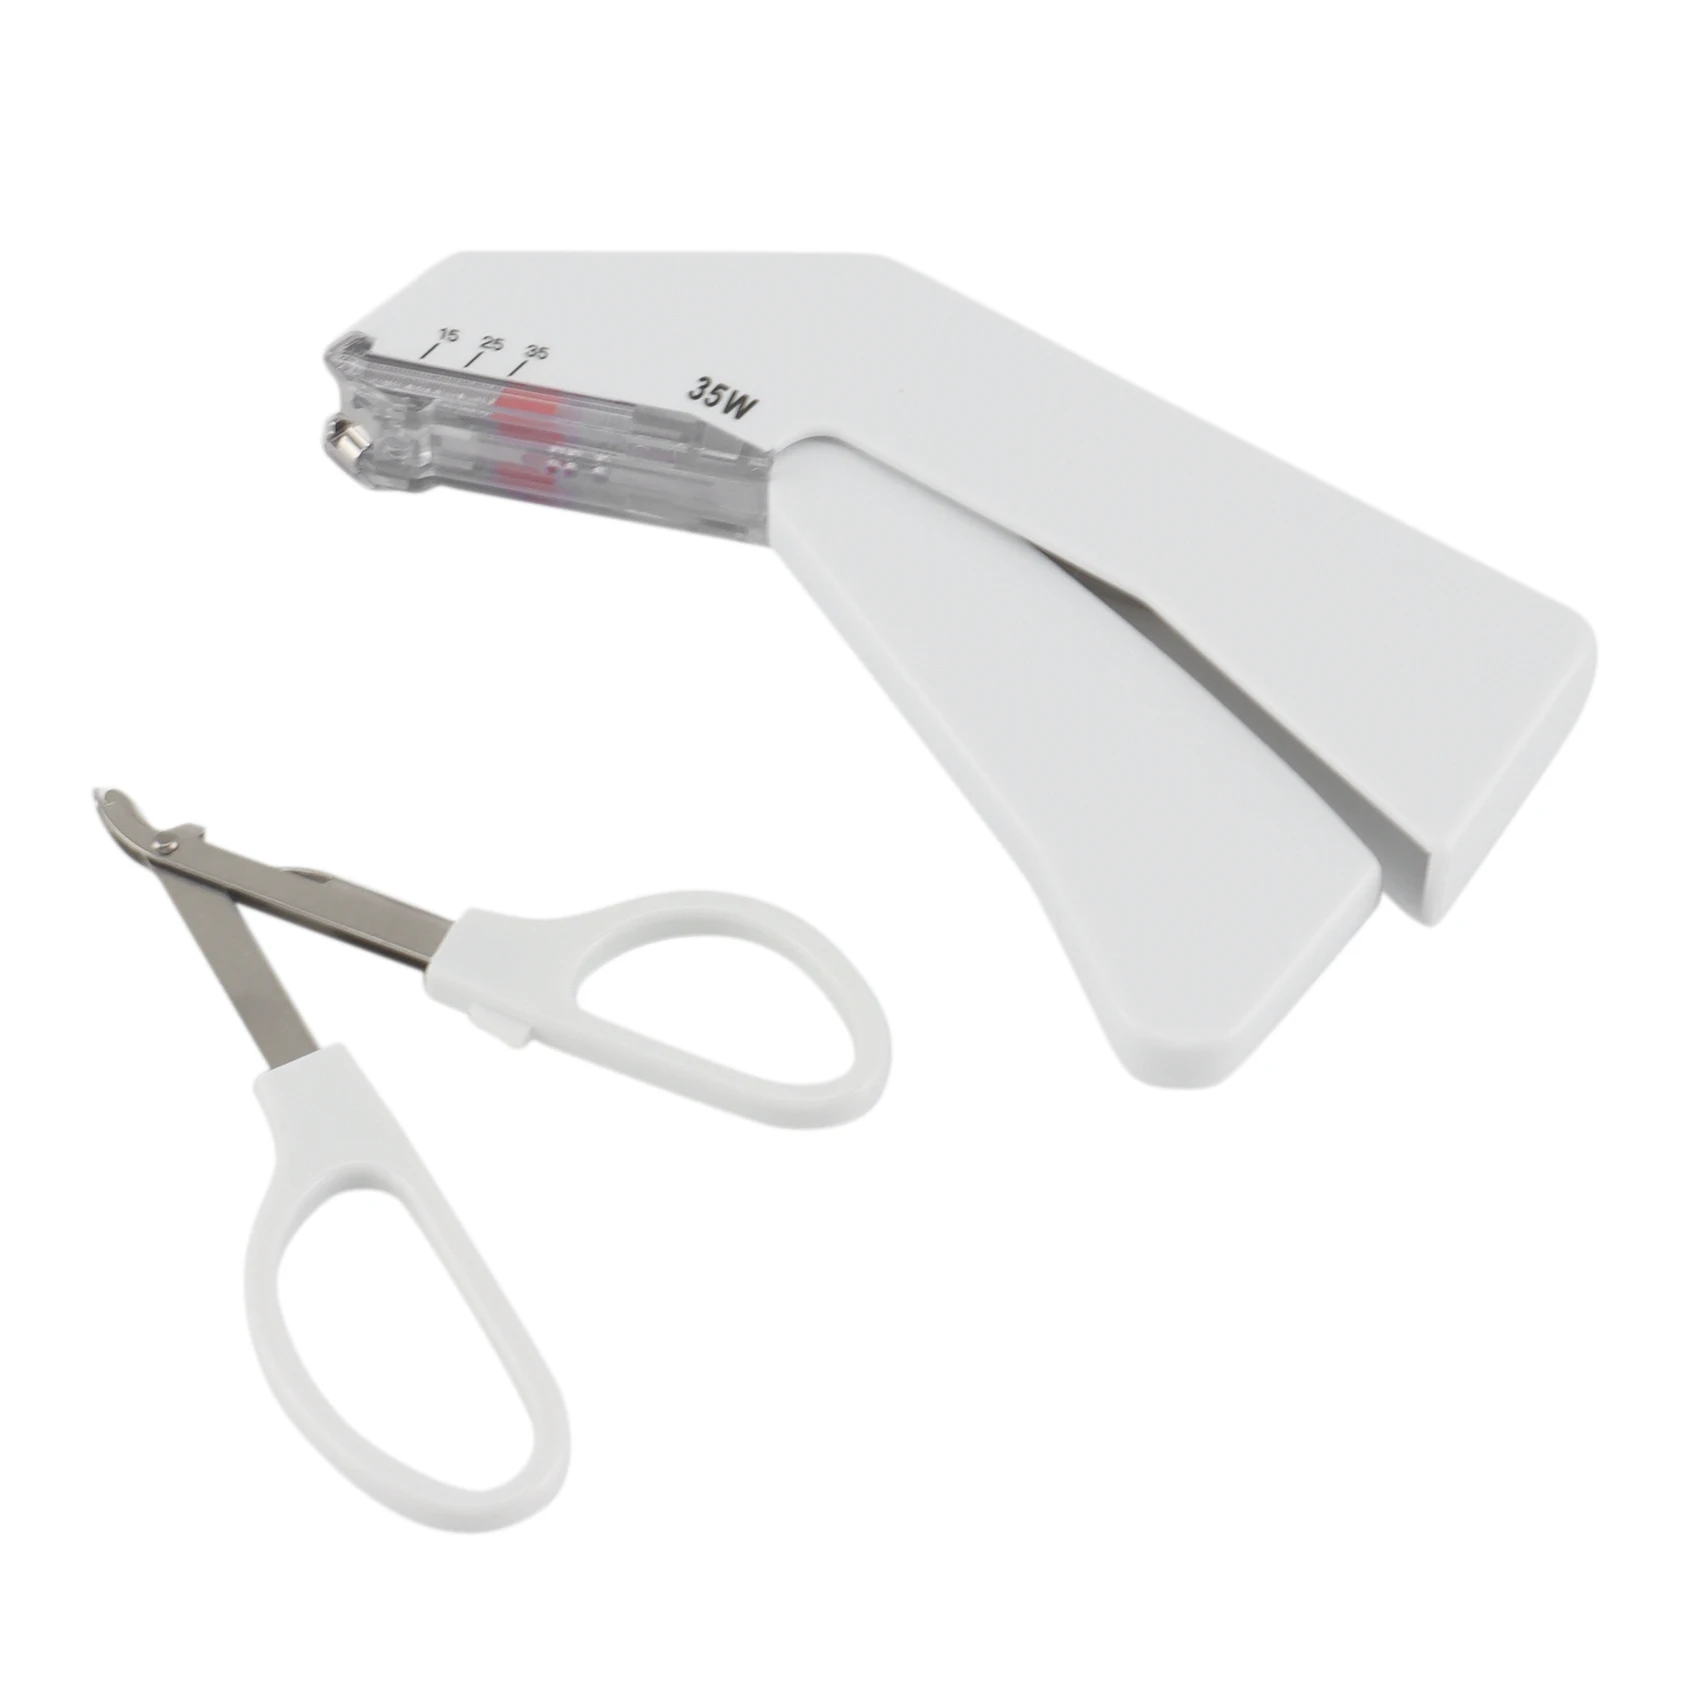 

35W Disposable Skin Stapler Stainless Steel Skin Stapler with A Nail Puller